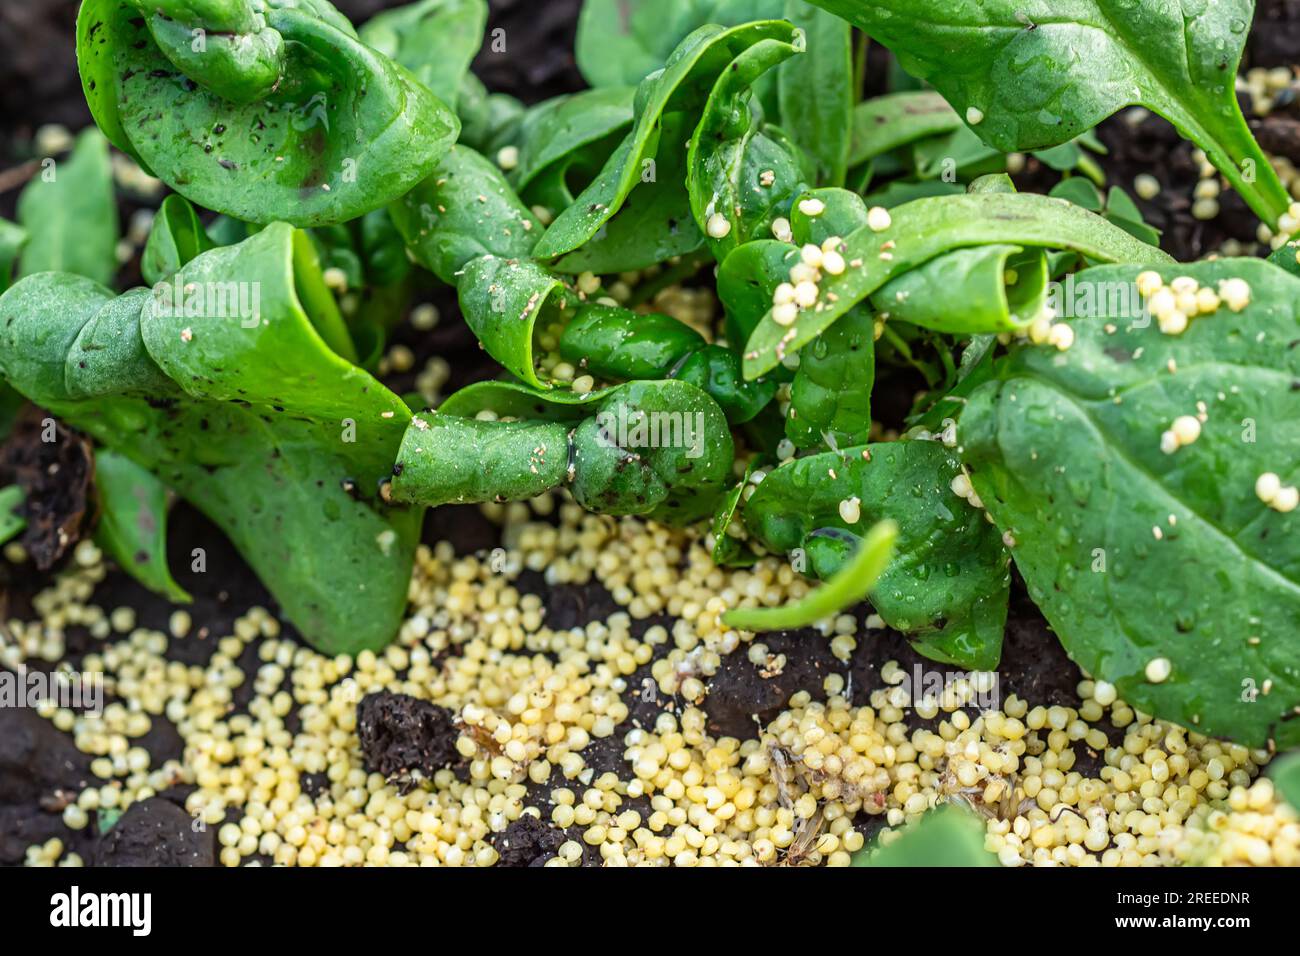 Scattered millet in an organic bed with aphid-affected spinach. damaged spinach leaves in an organic garden bed. The infected plants are evident, Stock Photo